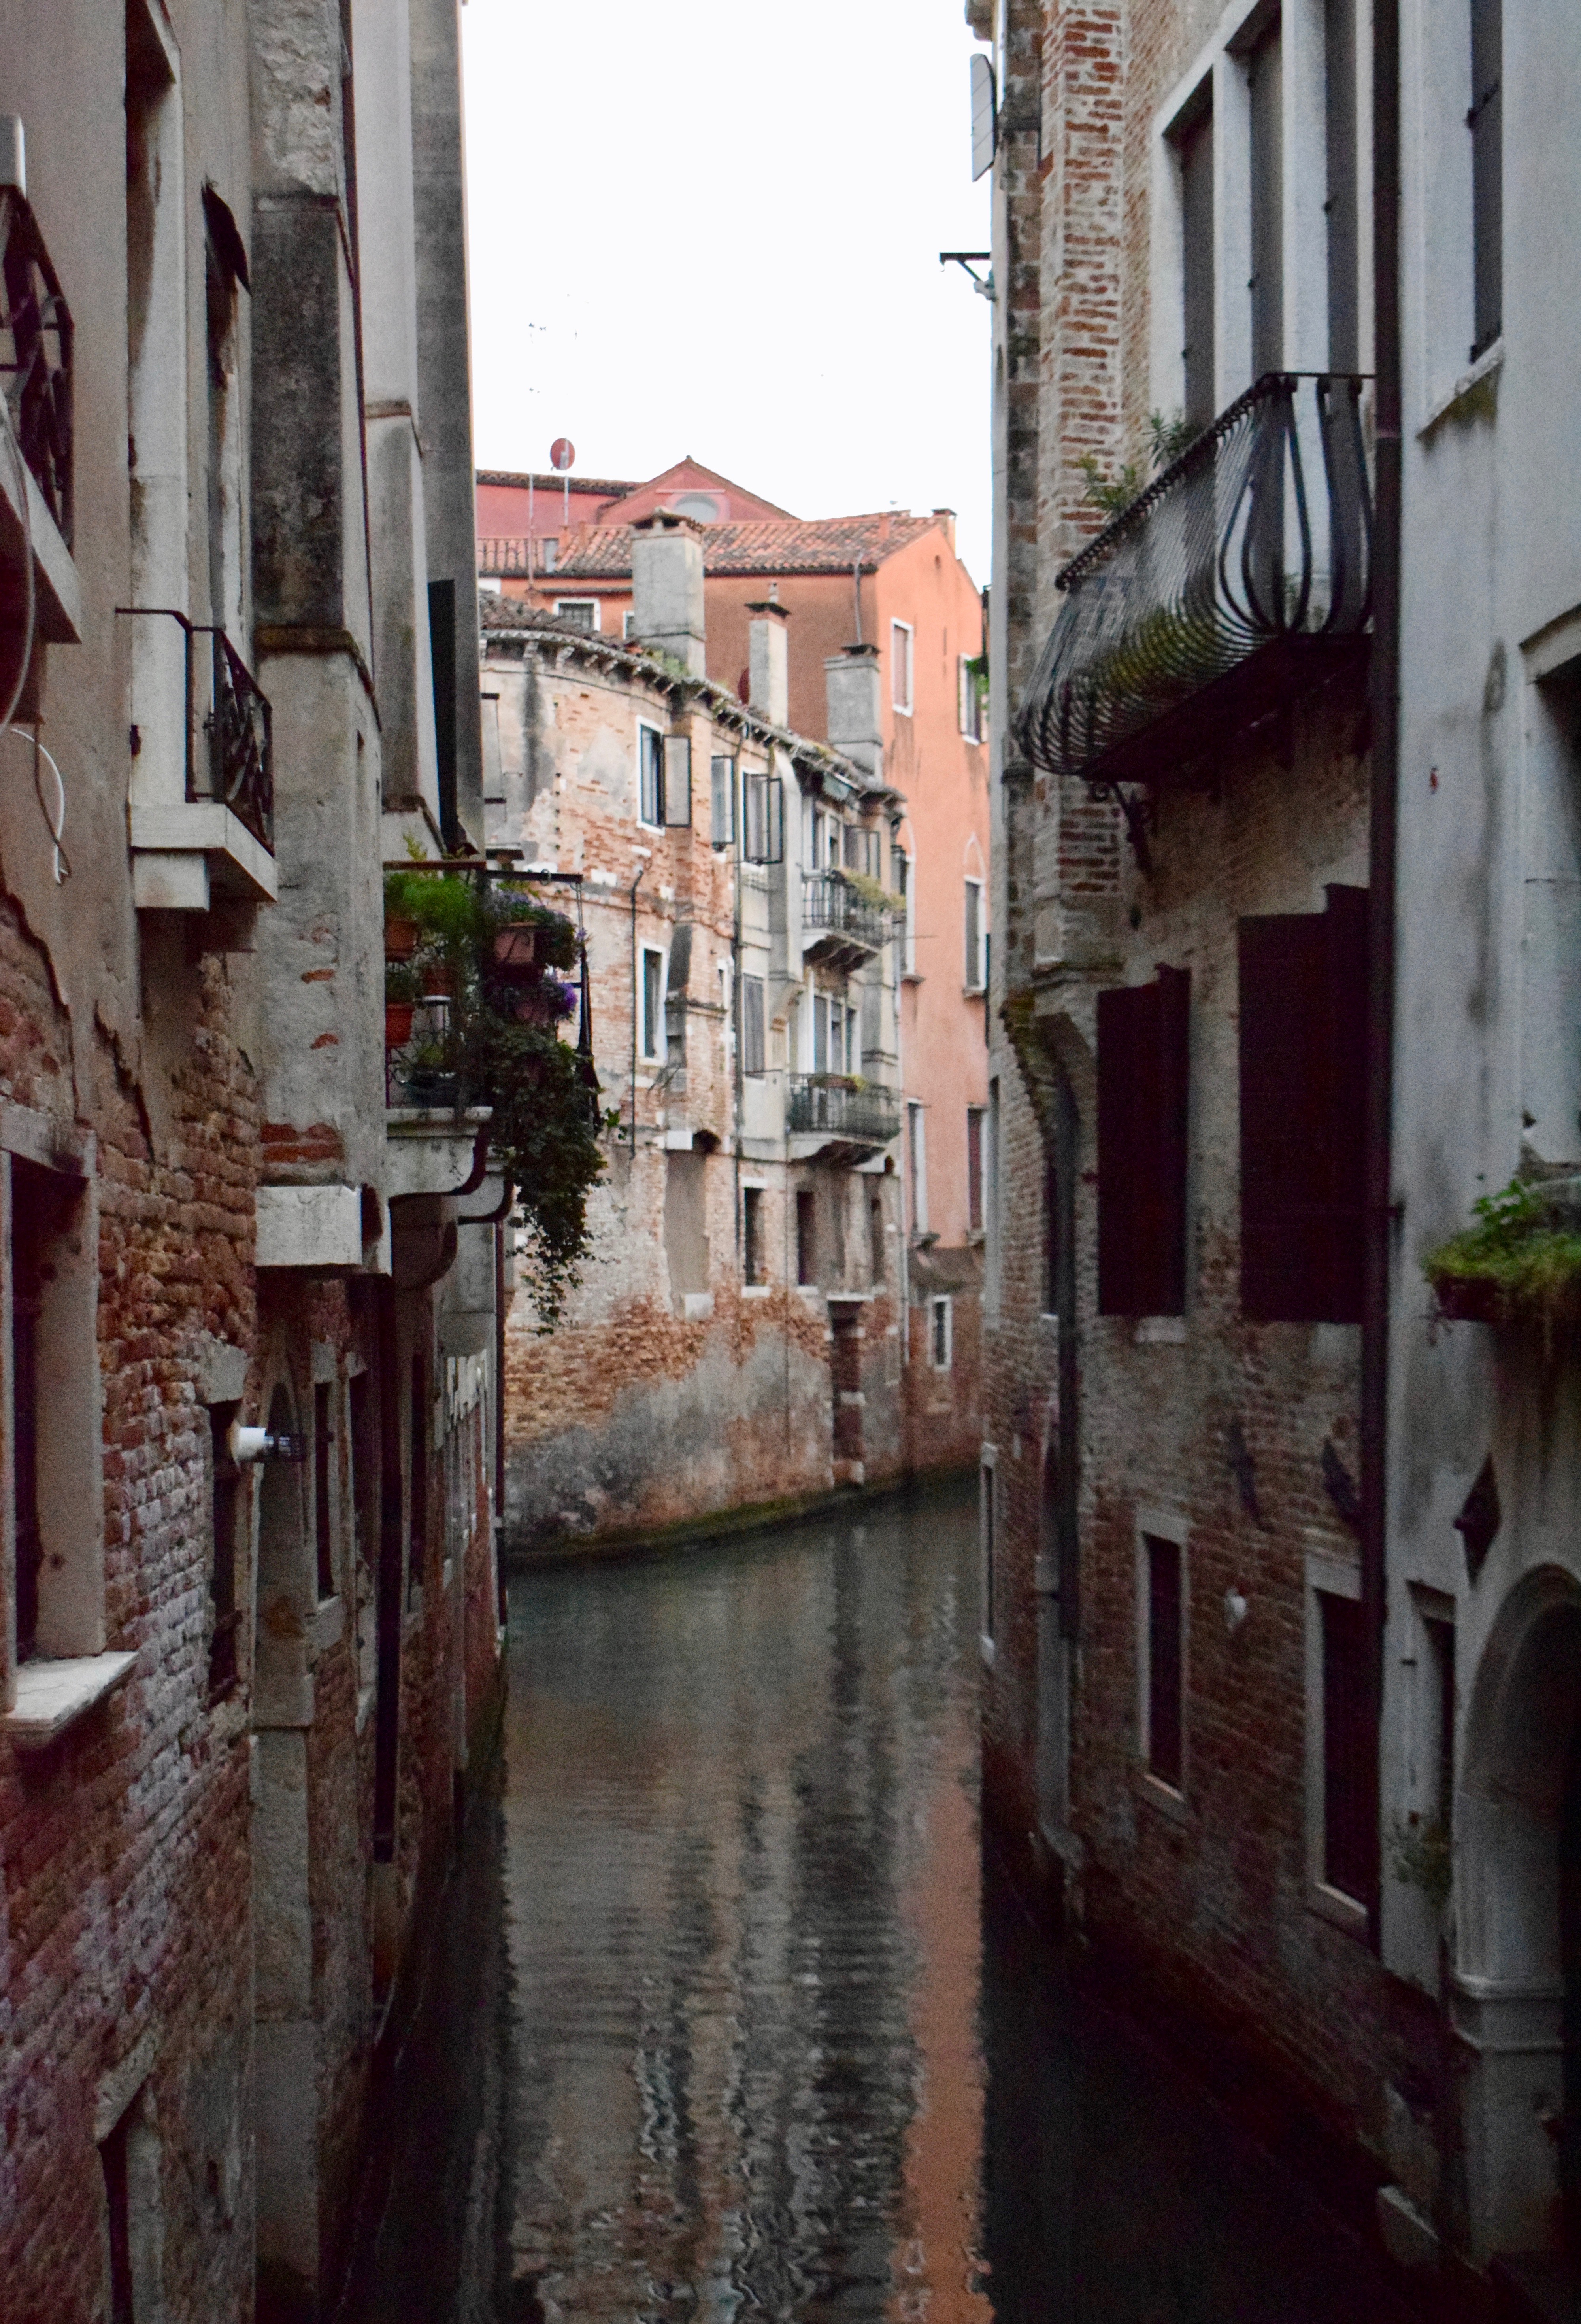 It's the Weekend! Number 120, An Intersection of Venetian Canals